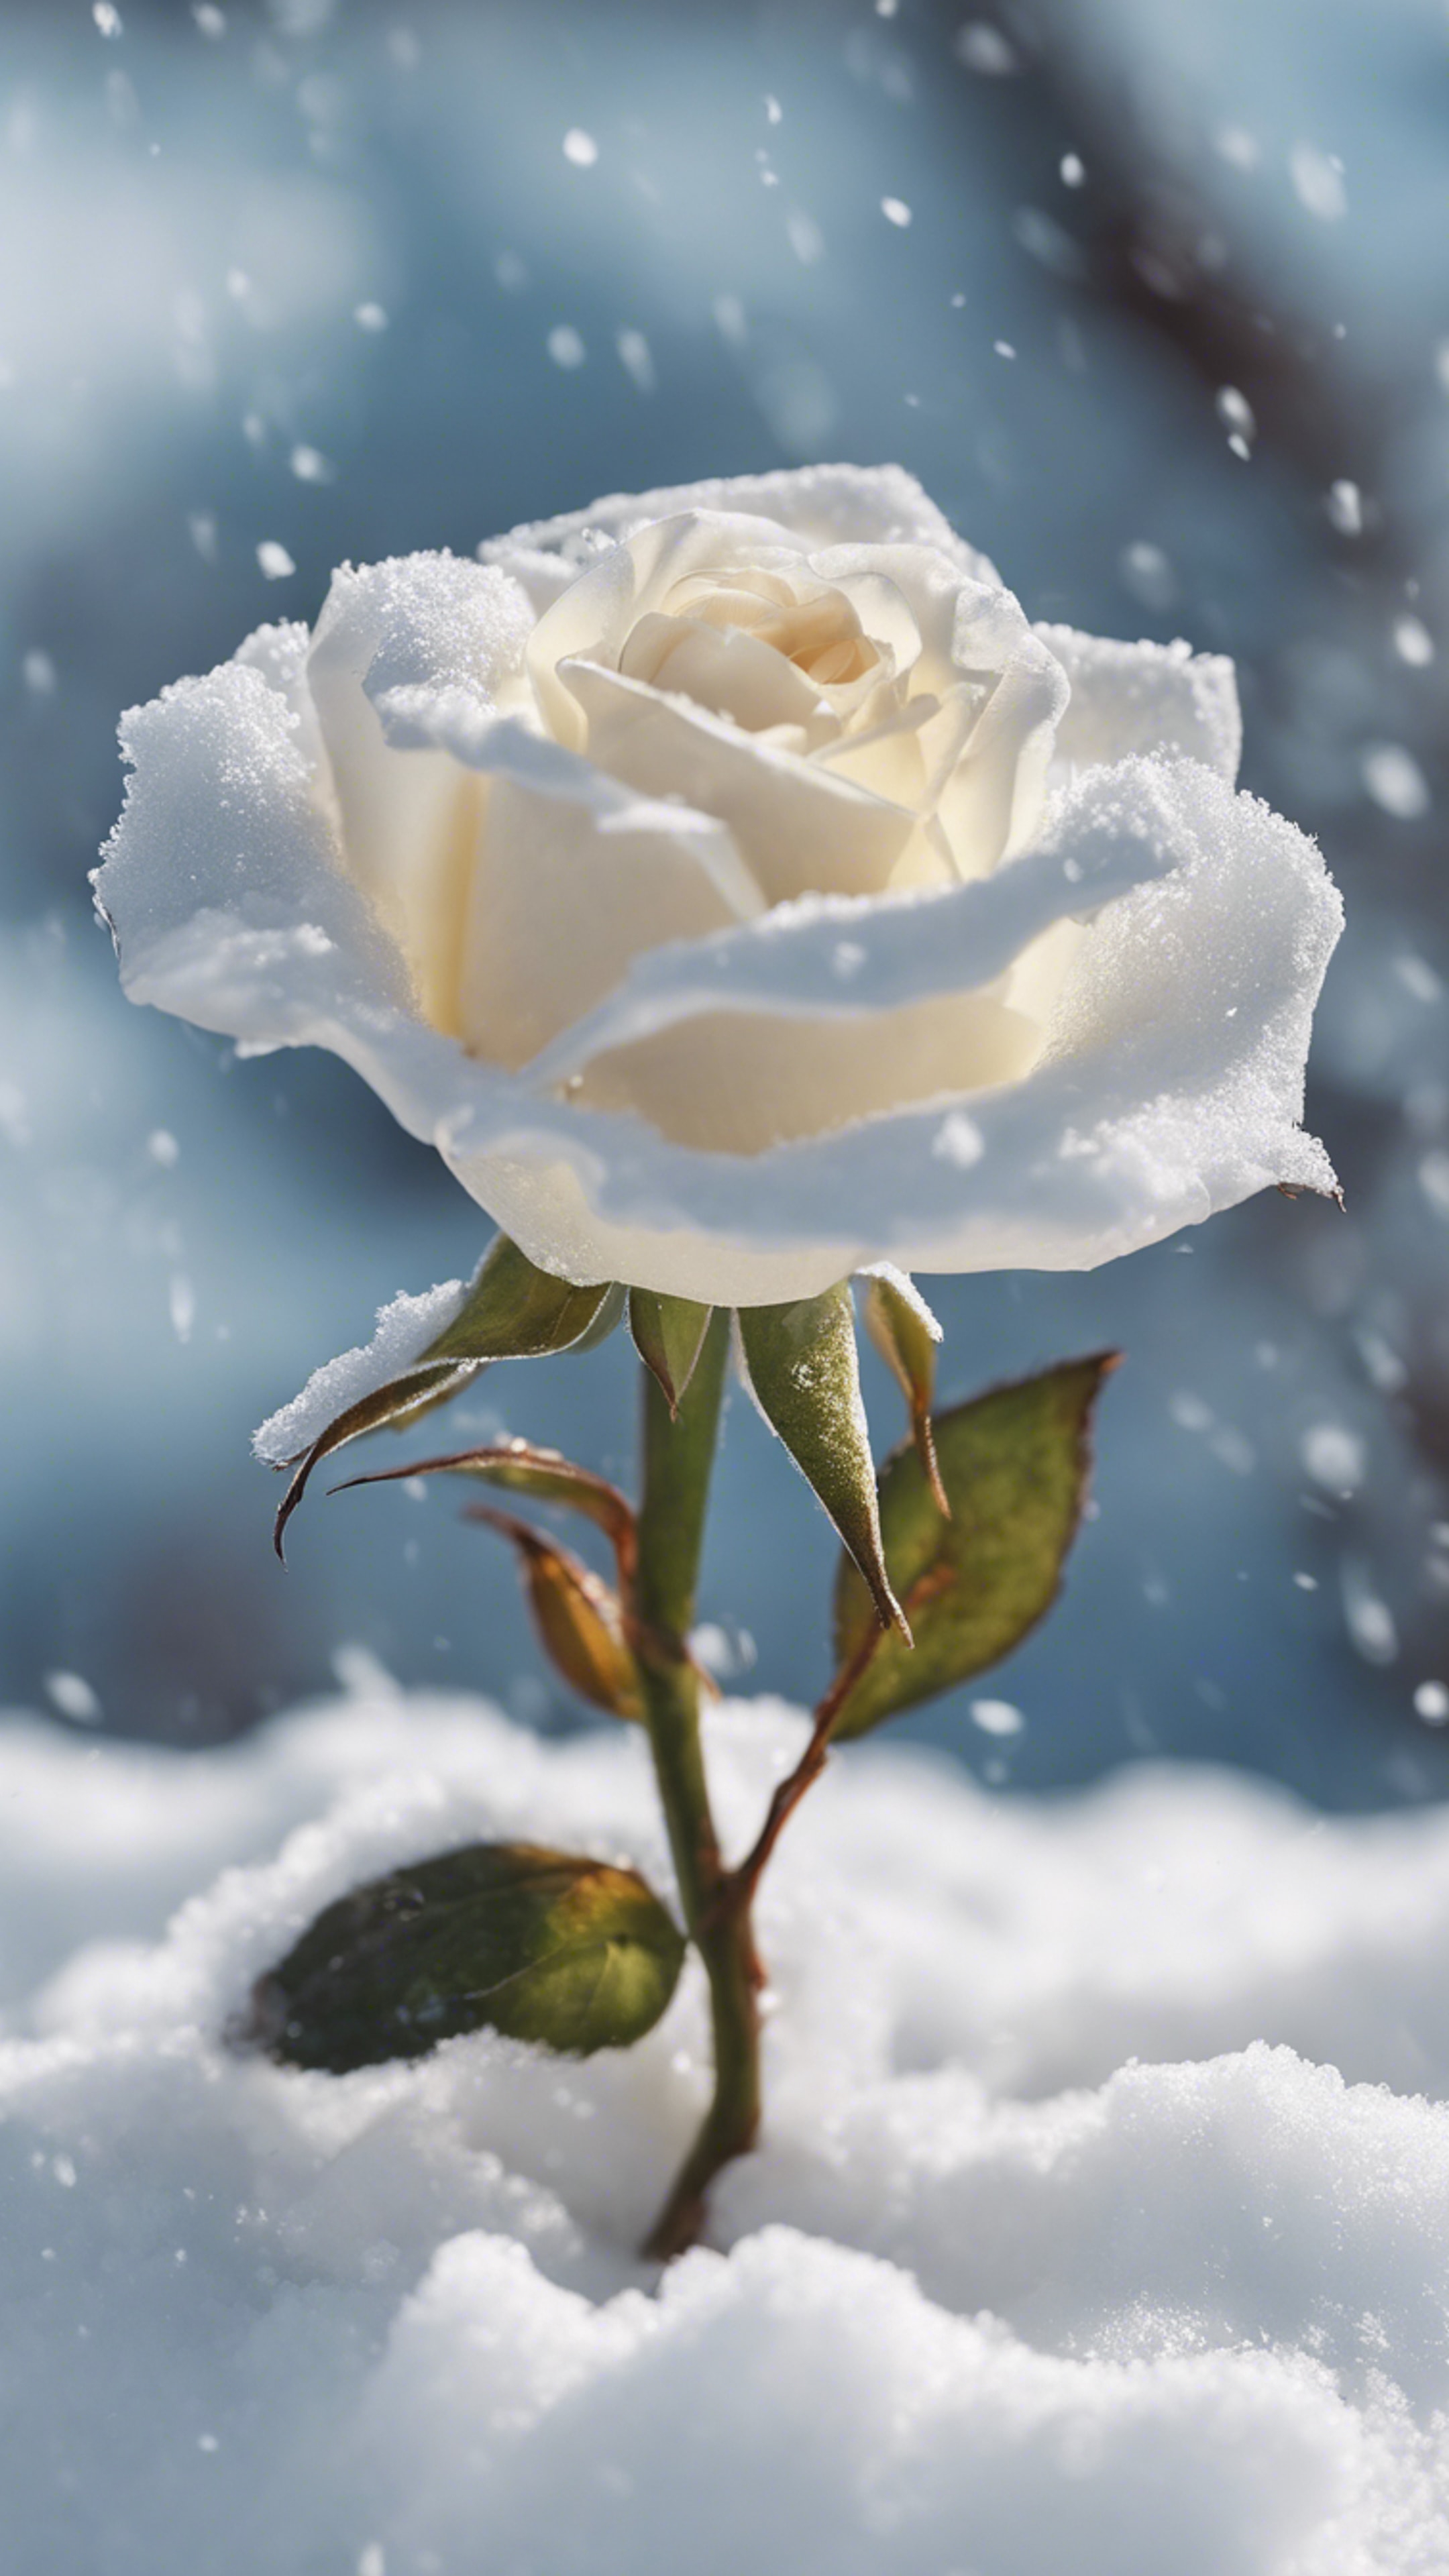 A newly opened white rose sticking out of a snowdrift in early spring. 벽지[6918b7c4f5774047824c]